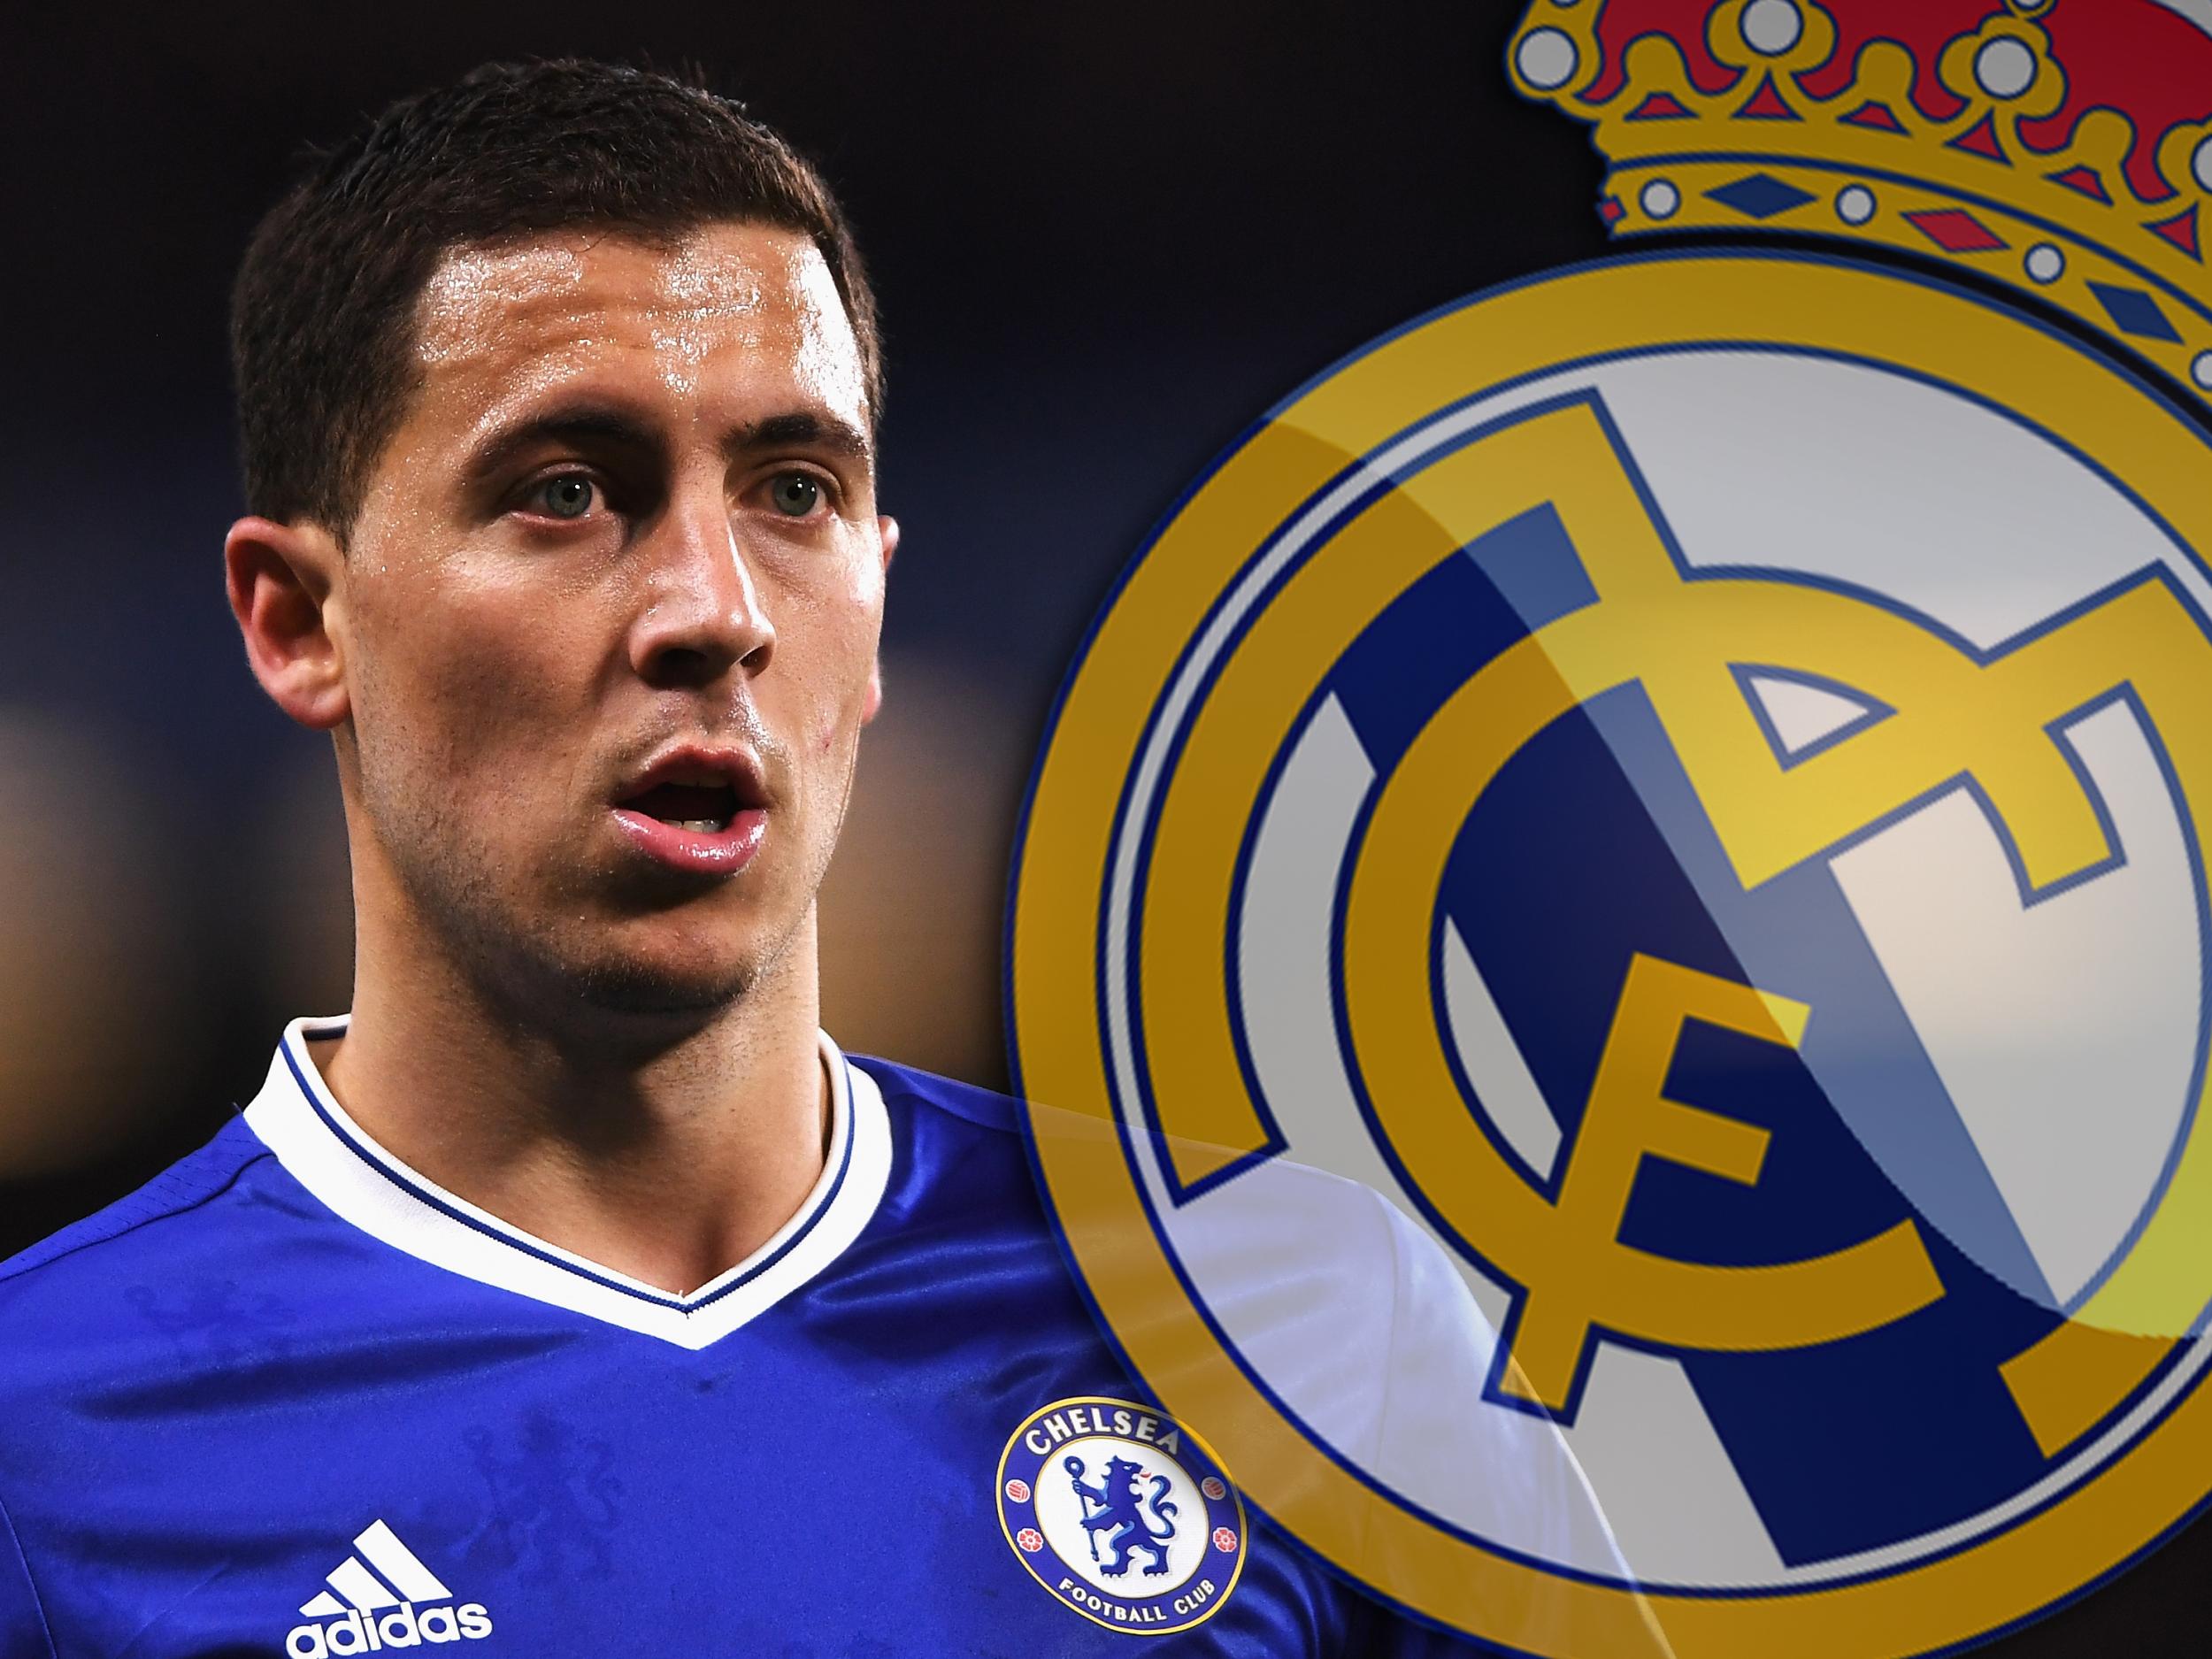 Eden Hazard has been strongly linked with a move to Real Madrid